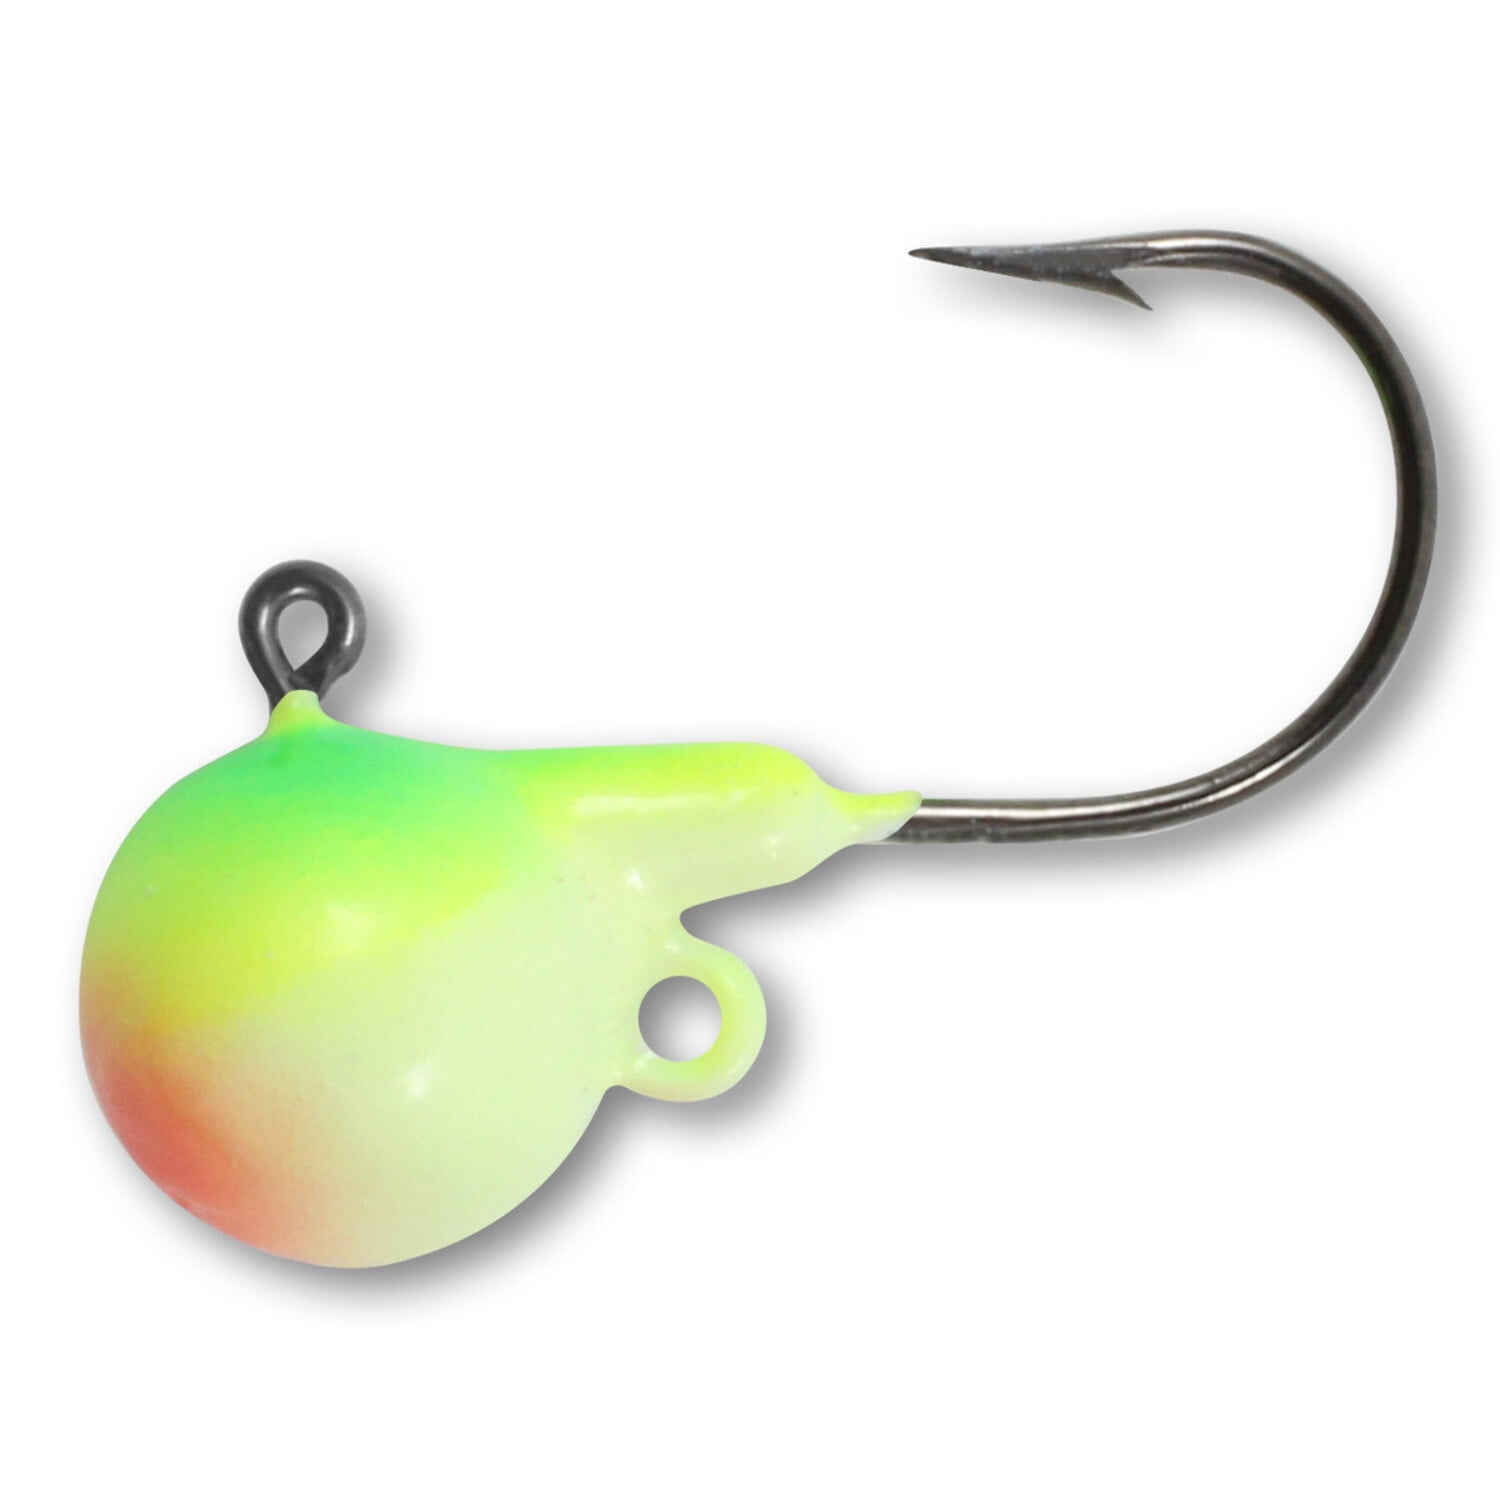 Northland Fishing Tackle Gum-Ball Jig, 1/4 oz, 15/card, Assorted Colors